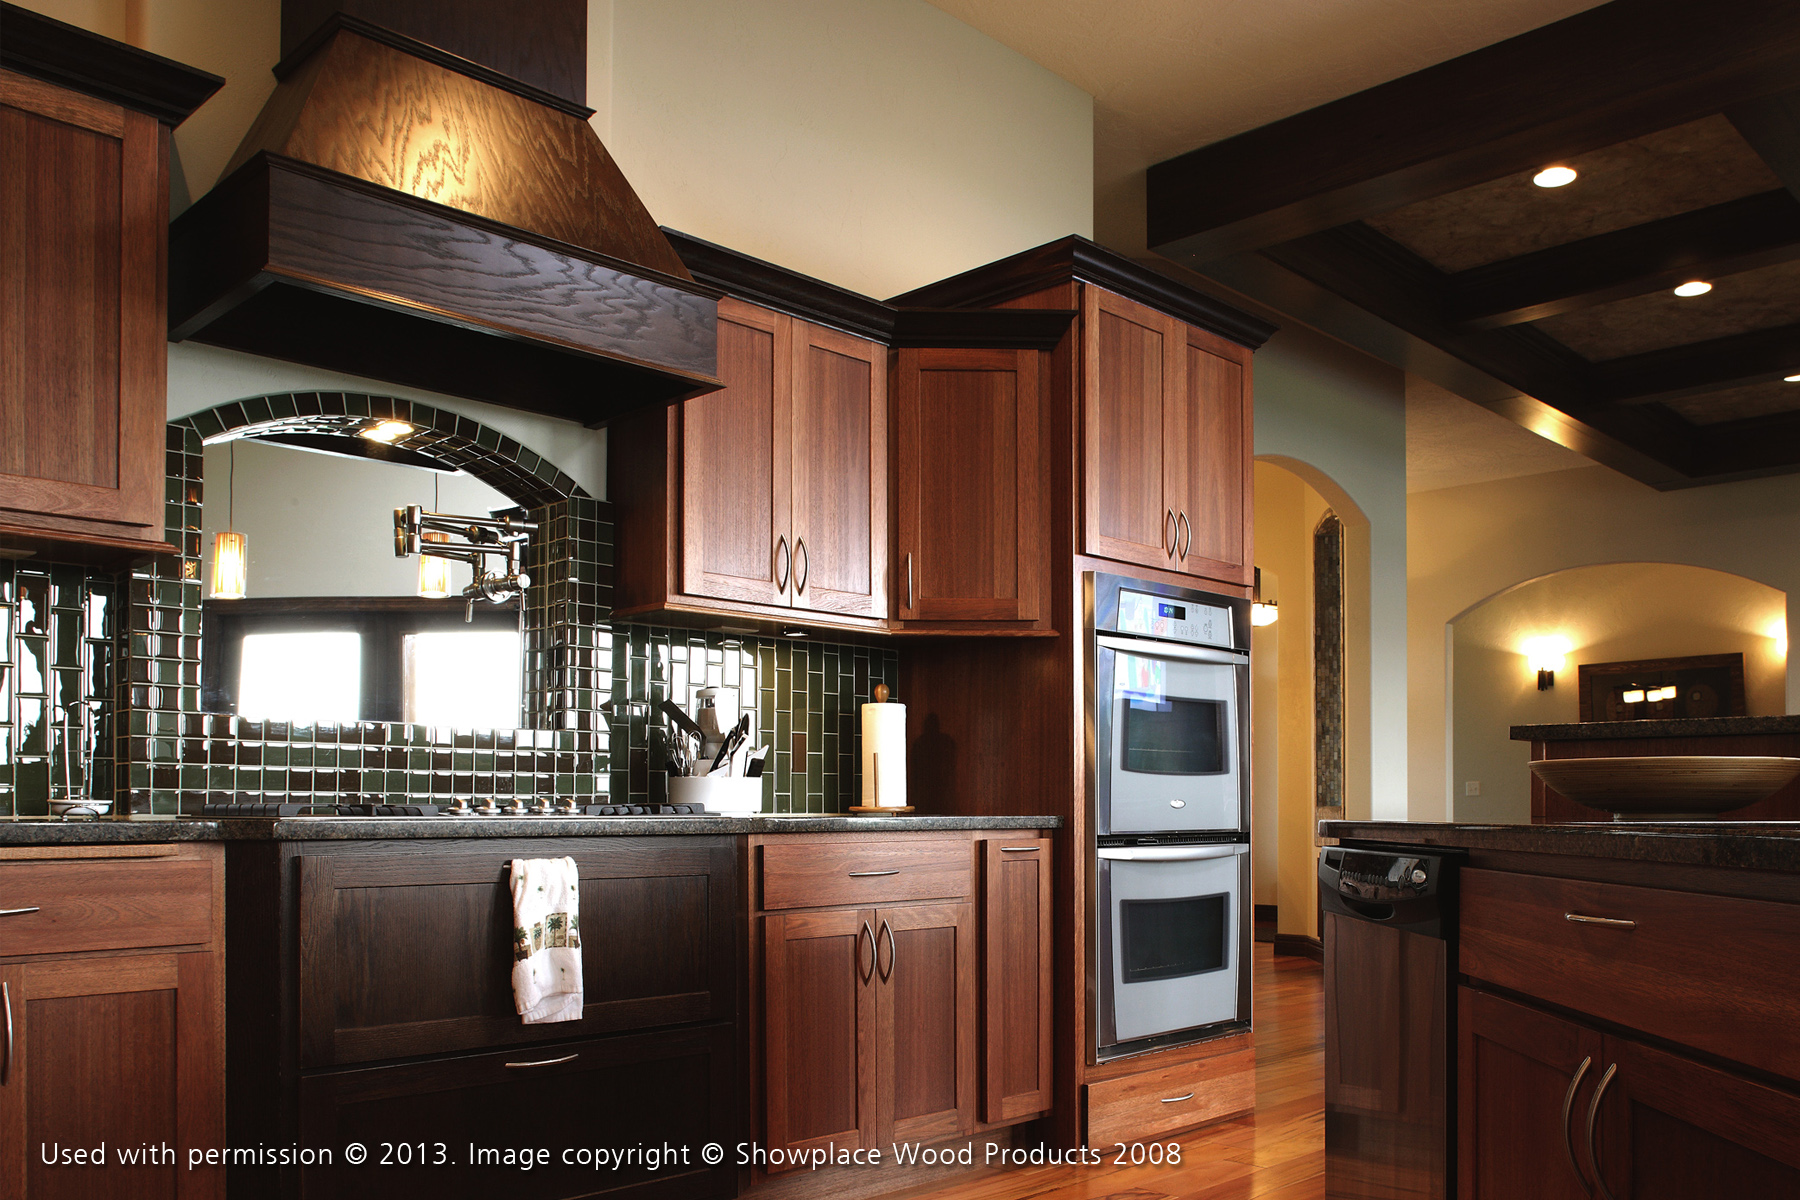 Cabinet Refacing Gallery Dreammaker Bath Kitchen Of Pittsburgh